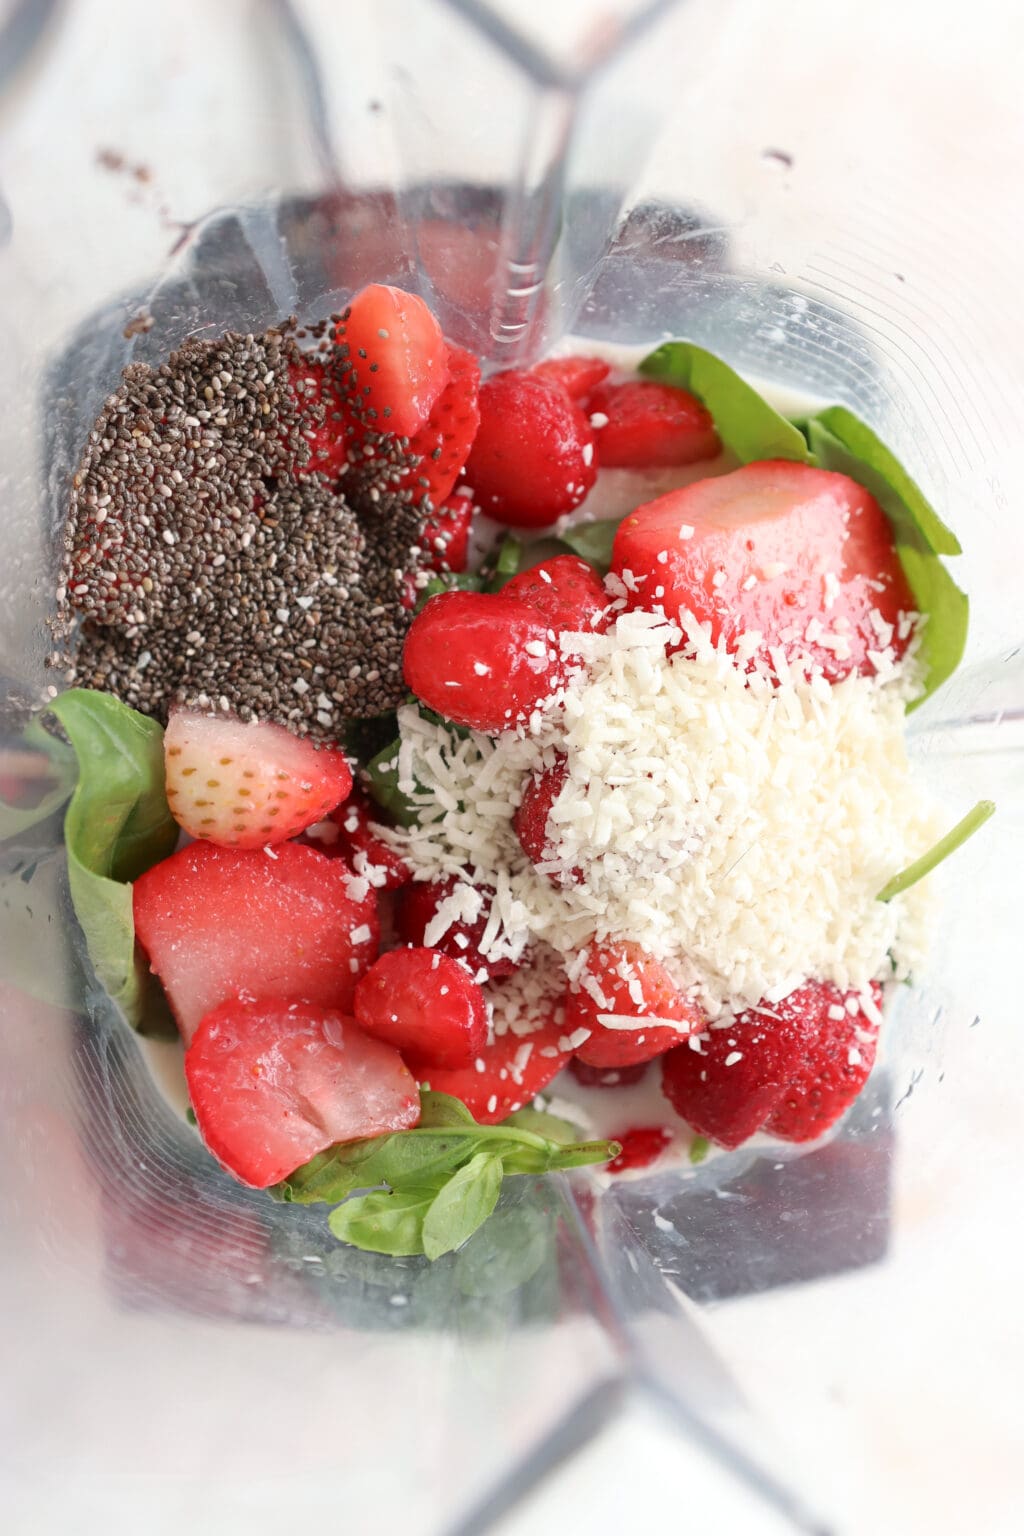 Ingredients for 5 Minute Frozen Strawberry & Basil Smoothie in a blender, including milk, Greek Yogurt, chia seeds, coconut flakes, strawberries, basil, and spinach